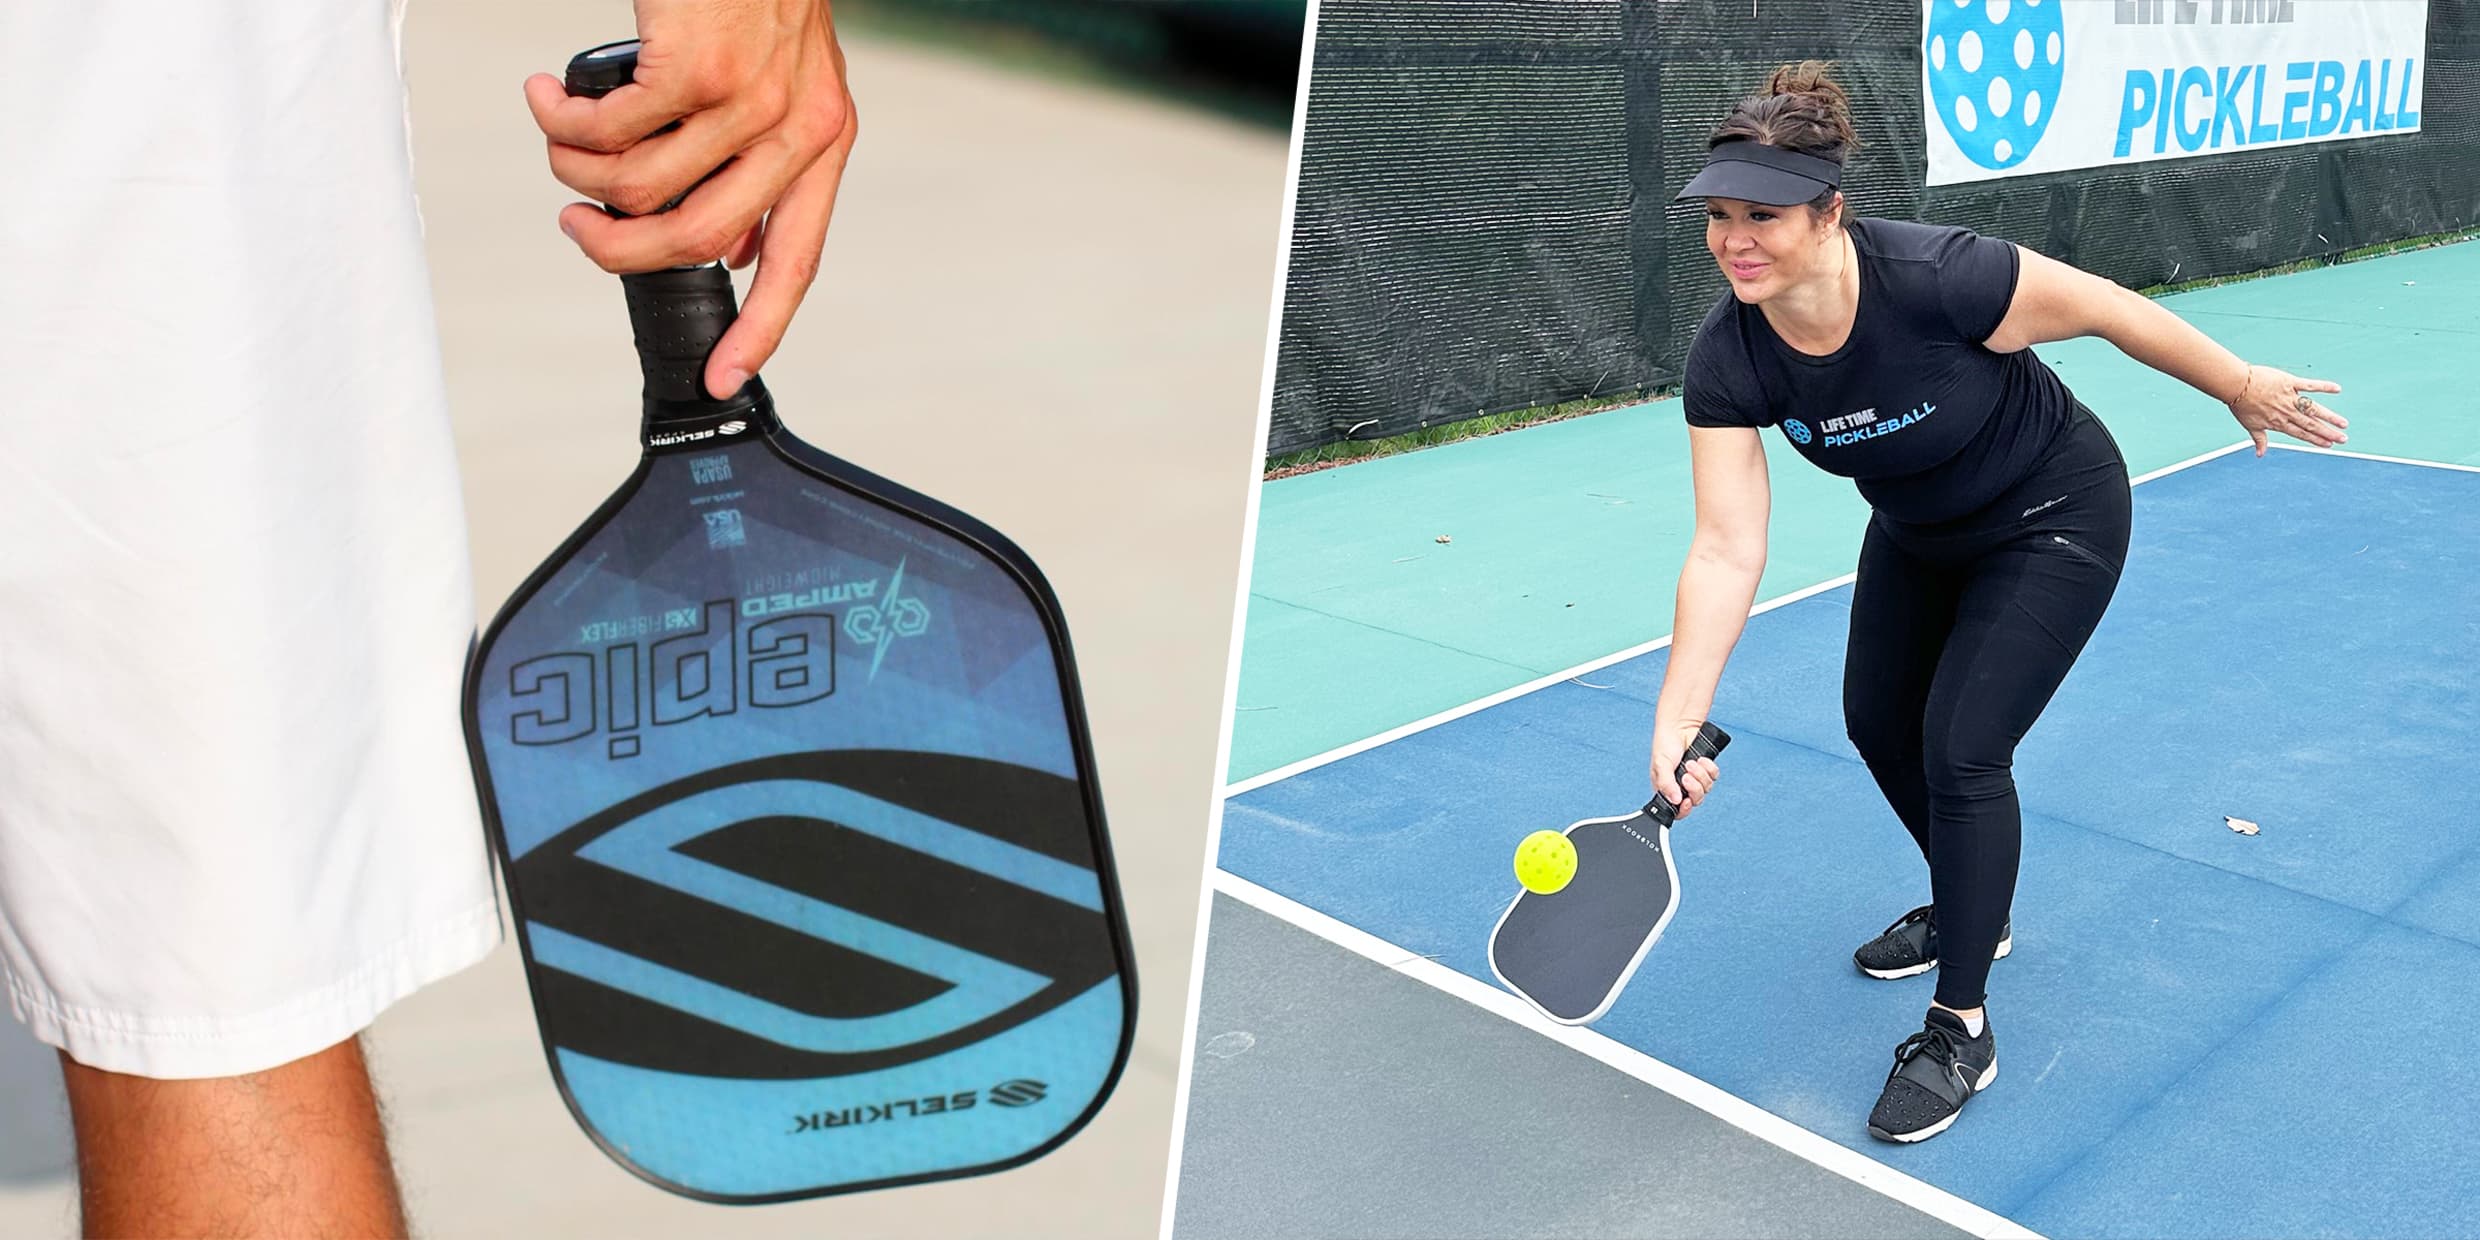 Selkirk AMPED Epic pickleball paddle next to Lifetime Pickleball player.